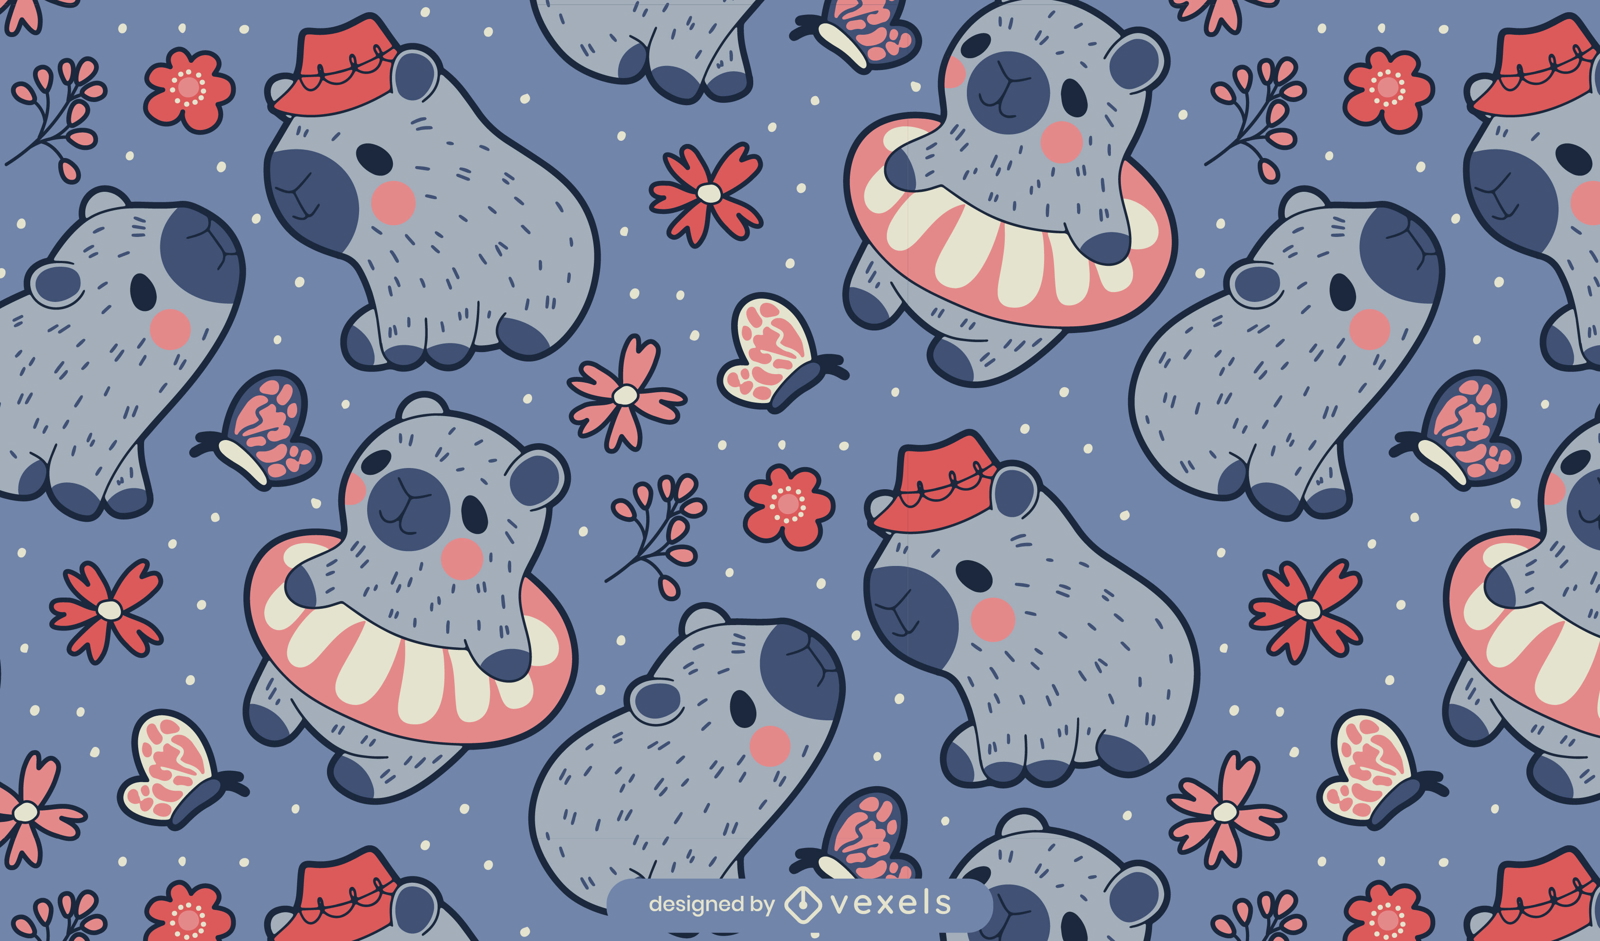 Cute and floral capybara pattern design